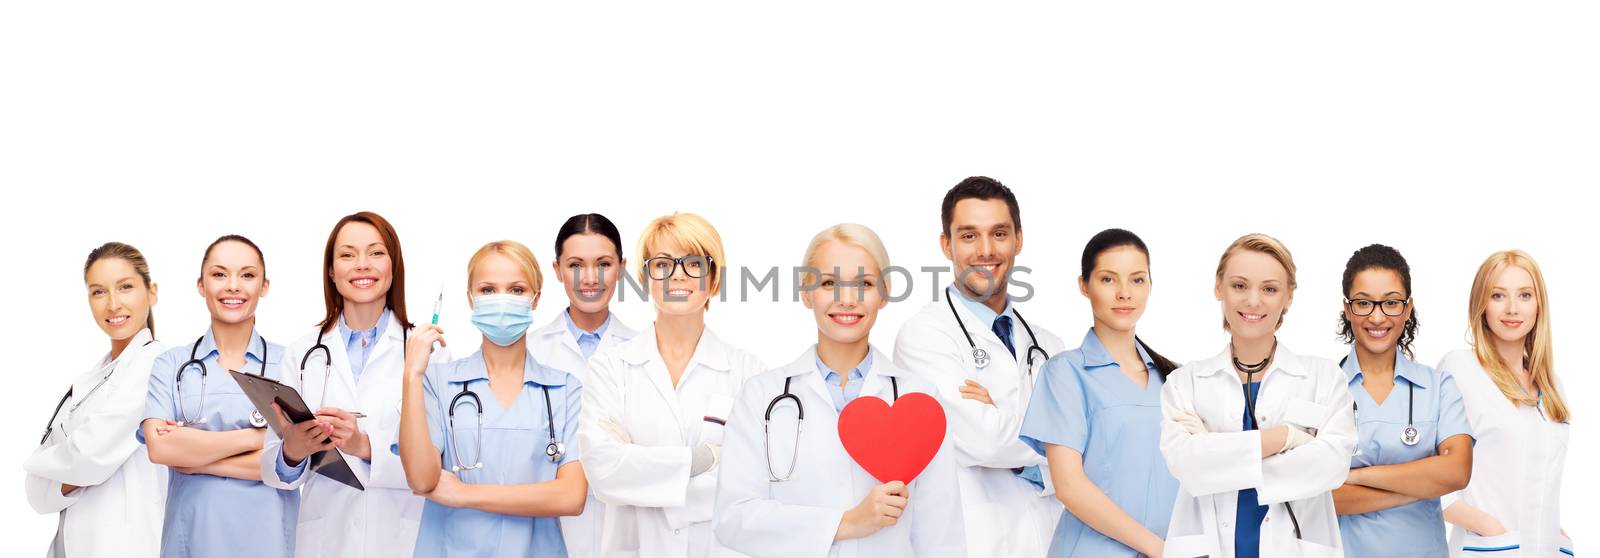 smiling doctors and nurses with red heart by dolgachov